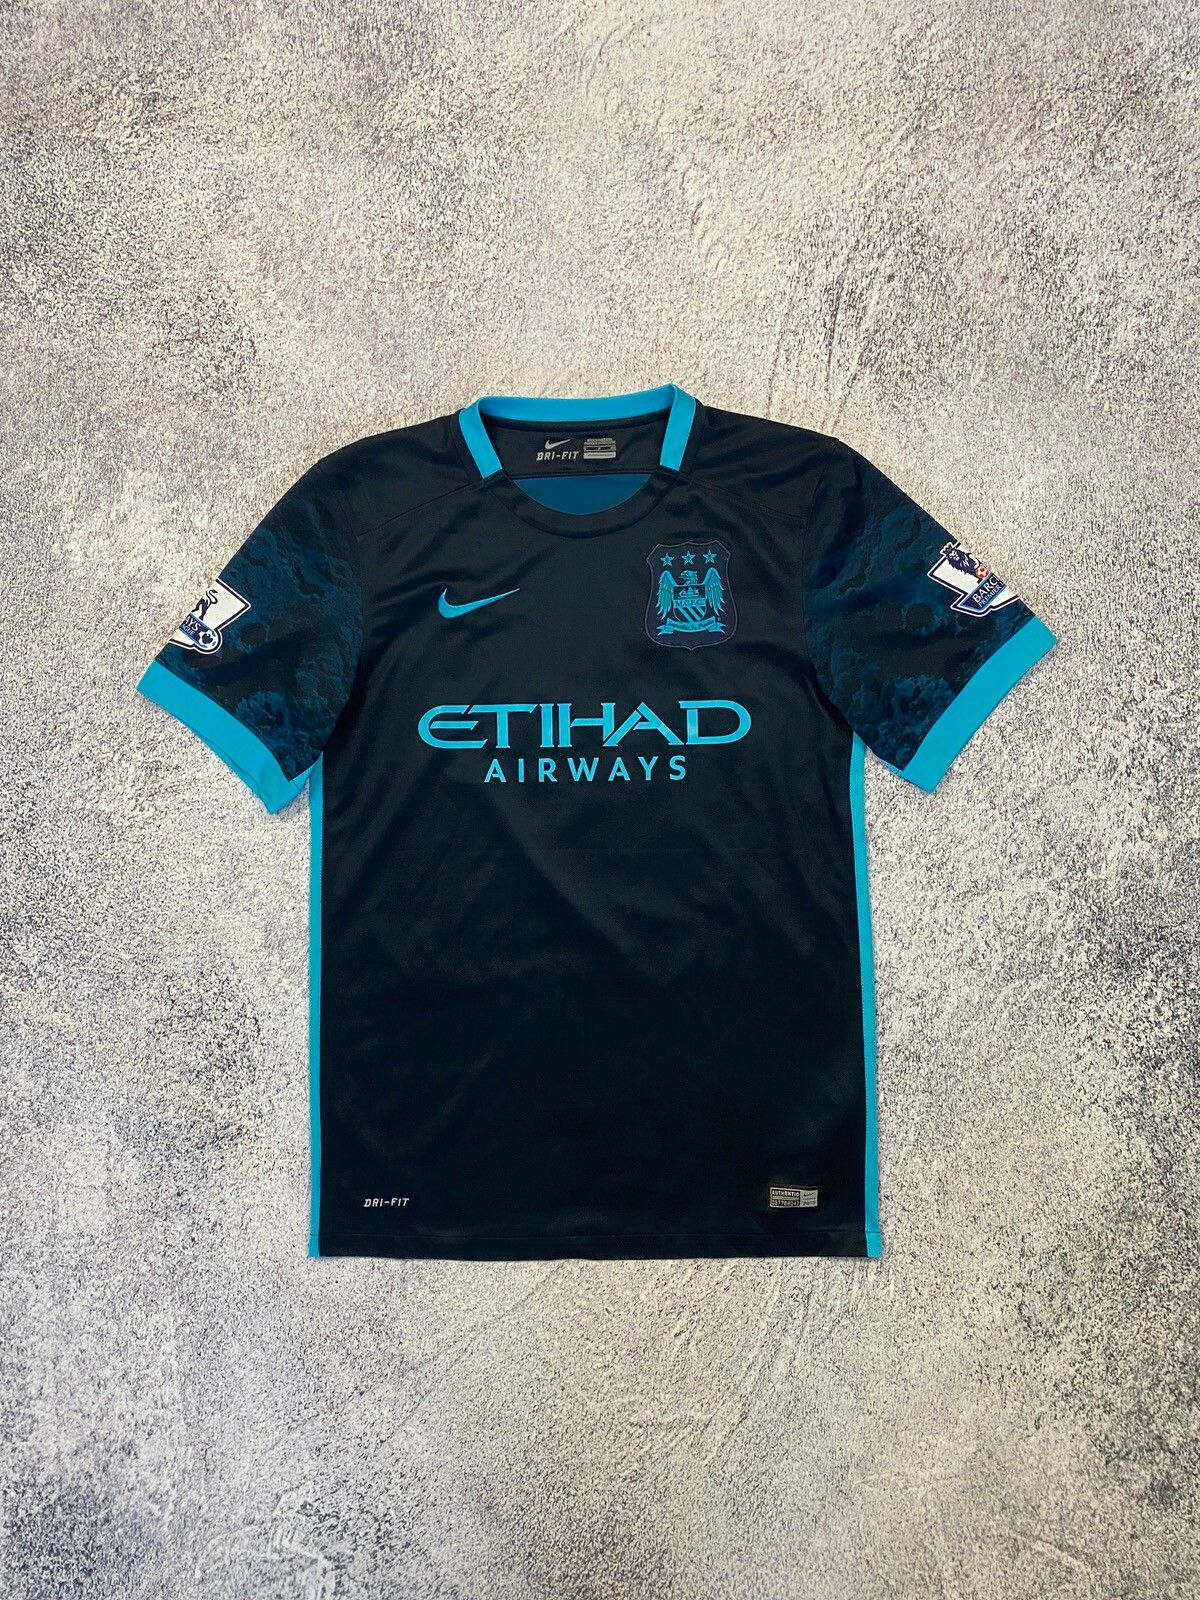 Pre-owned Jersey X Nike Manchester City De Bruyne 2015 2016 Football Soccer Jersey In Blue